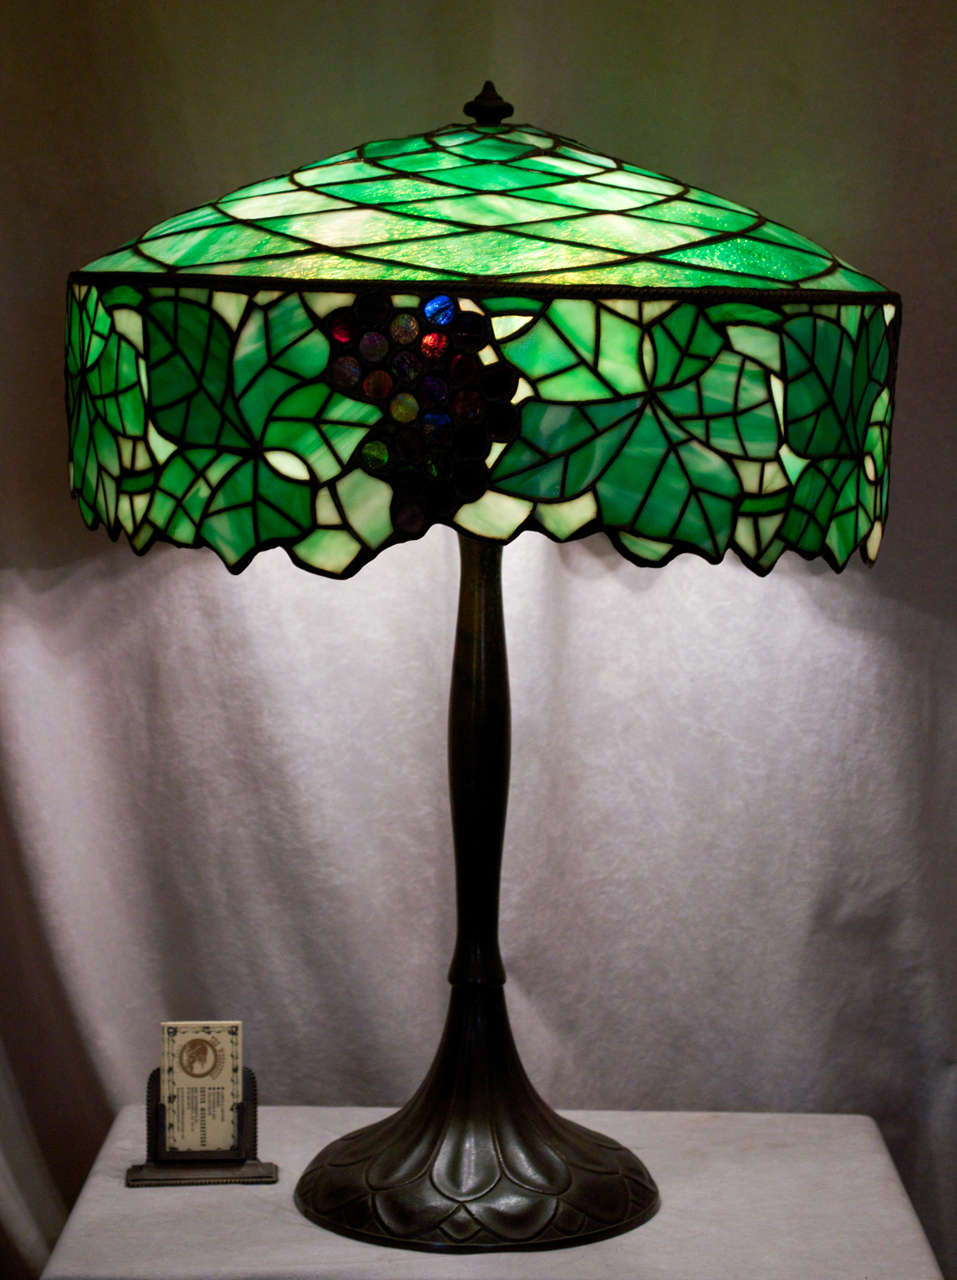 This extra large and well designed leaded glass lamp is signed on both the bronze base and the shade.  A similar model is pictured on page 139, top right, in the book, 